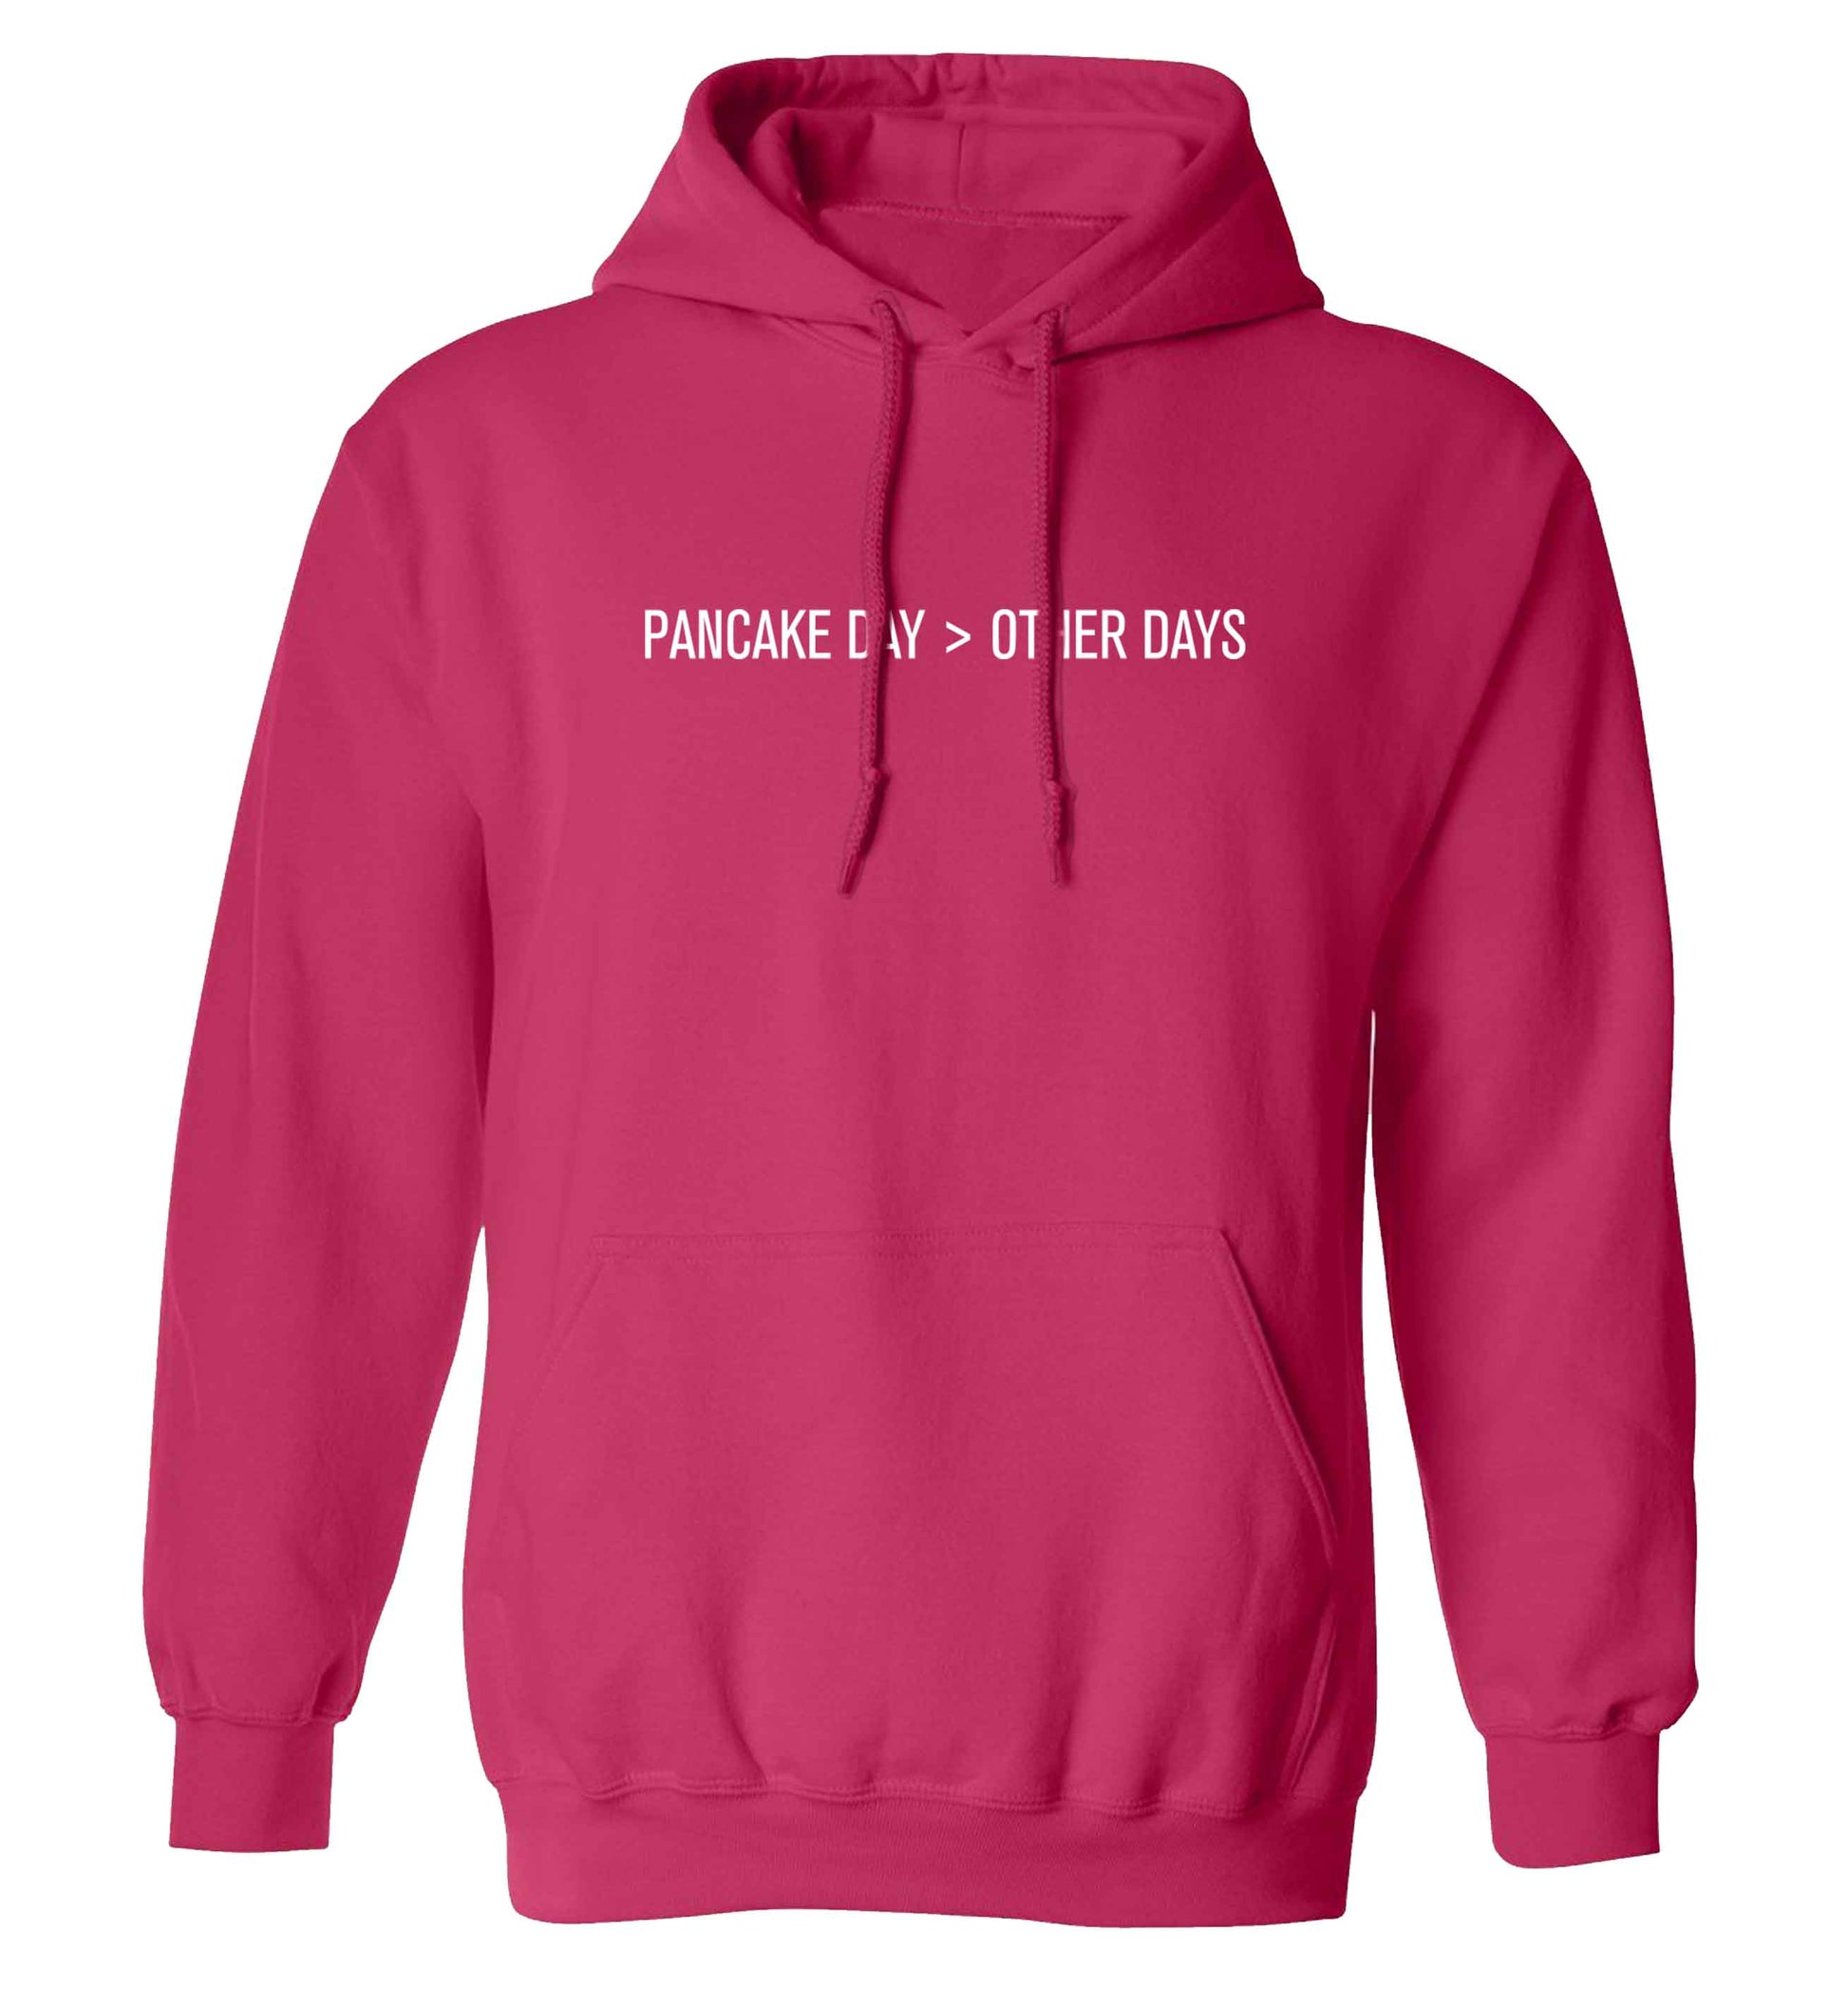 Pancake day > other days adults unisex pink hoodie 2XL